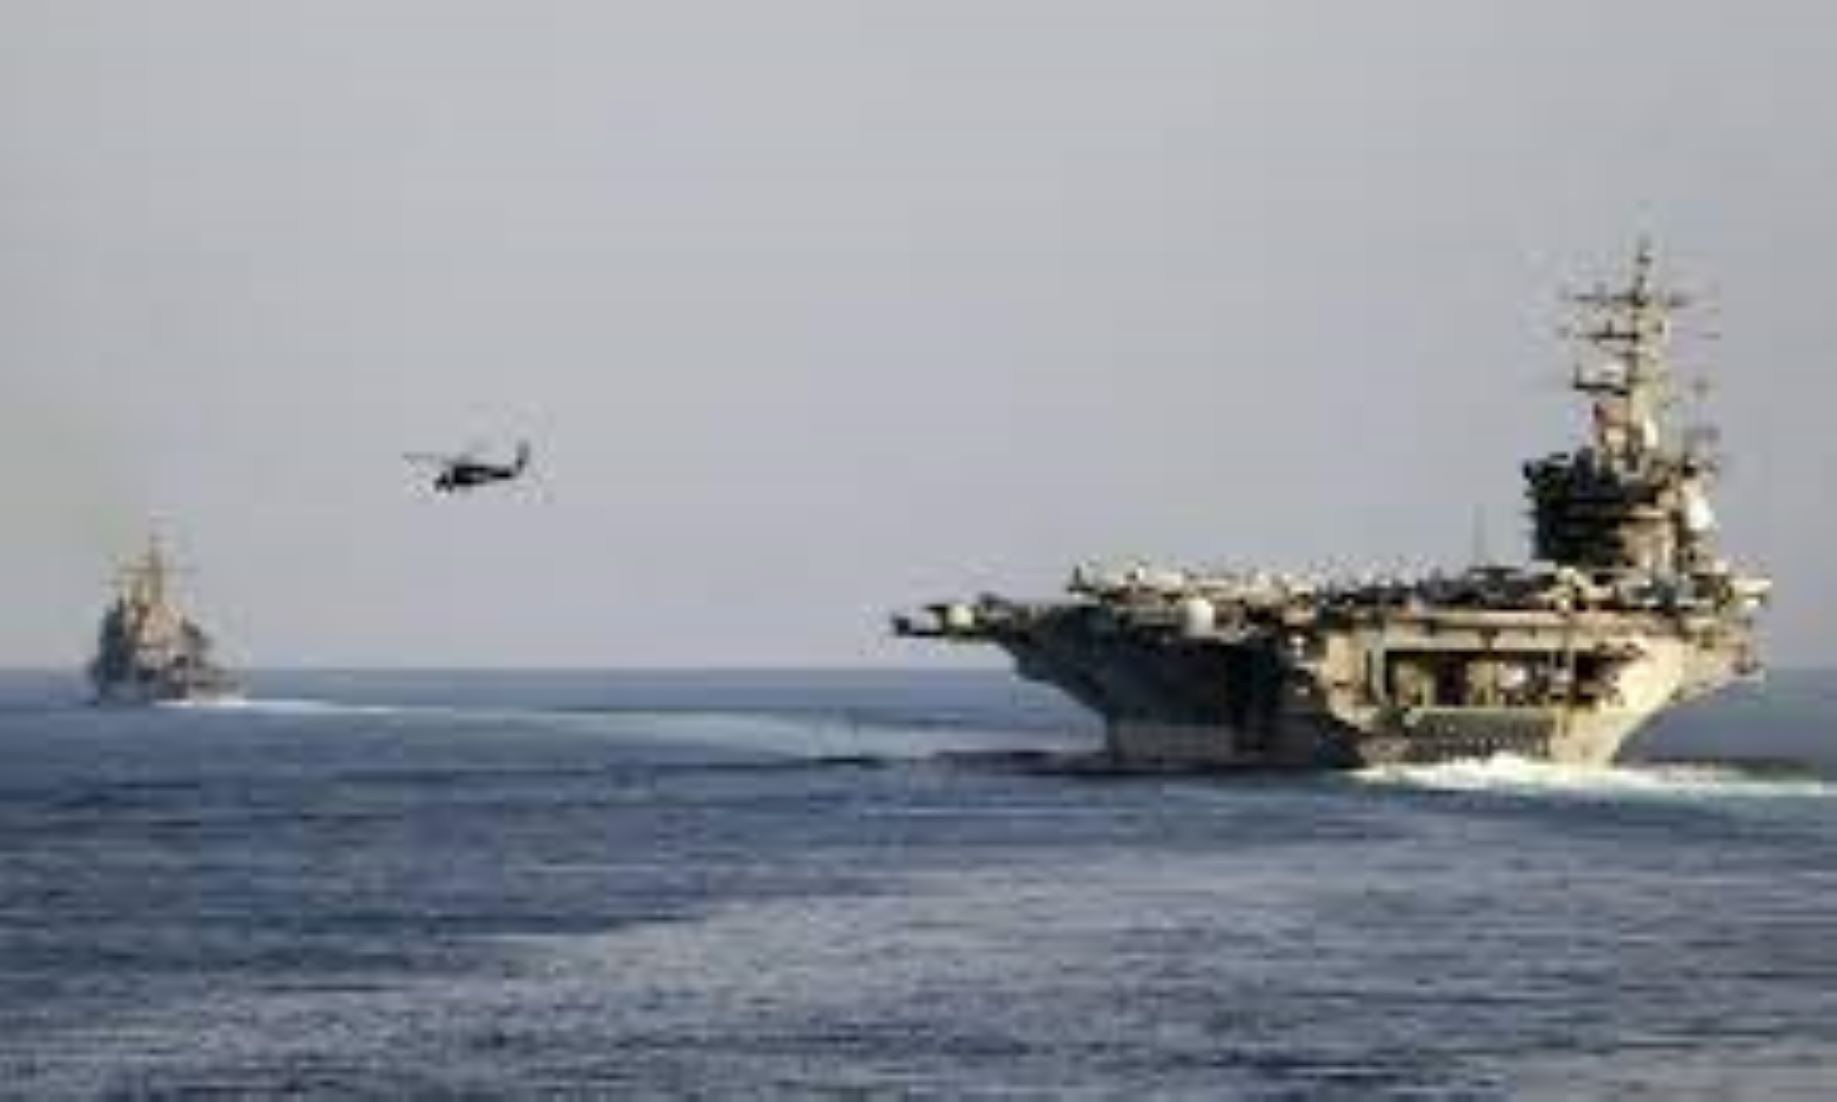 Iran’s Army Tracks, Identifies U.S. Aircraft Carrier In Regional Waters: Report